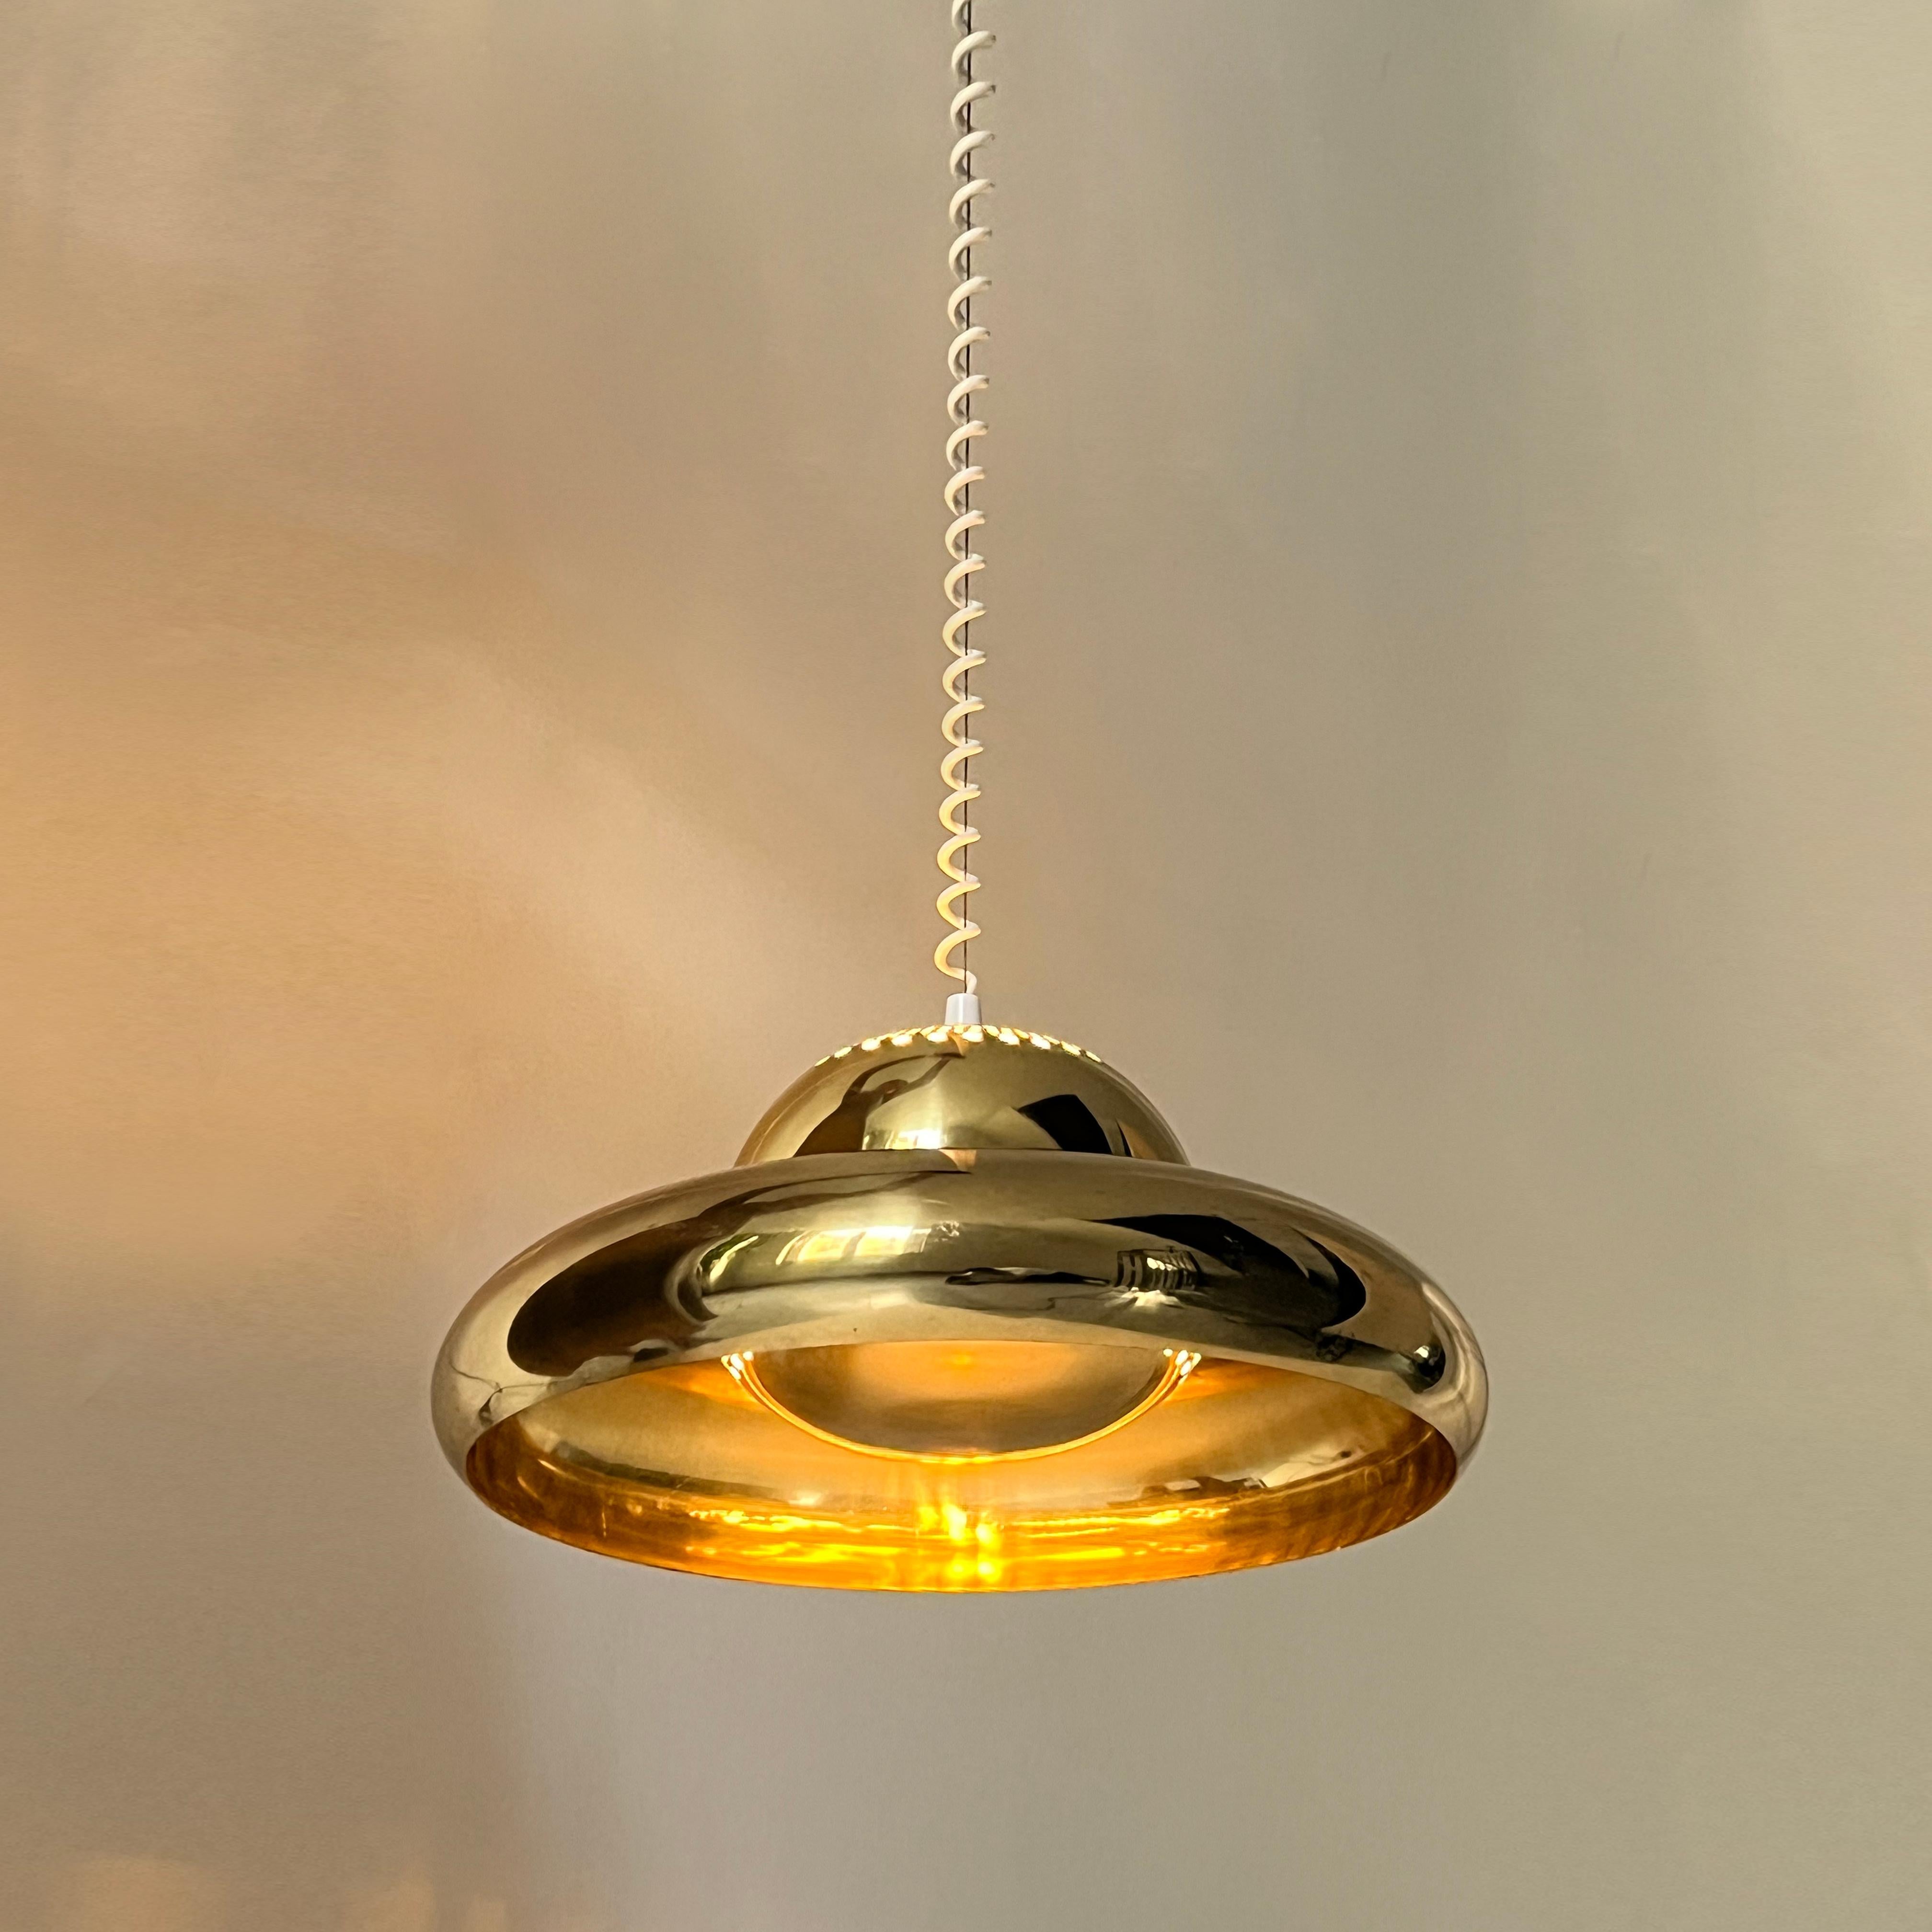 Brass Pendant Fior Di Loto by Afra and Tobia Scarpa for Flos, 1960s For Sale 2